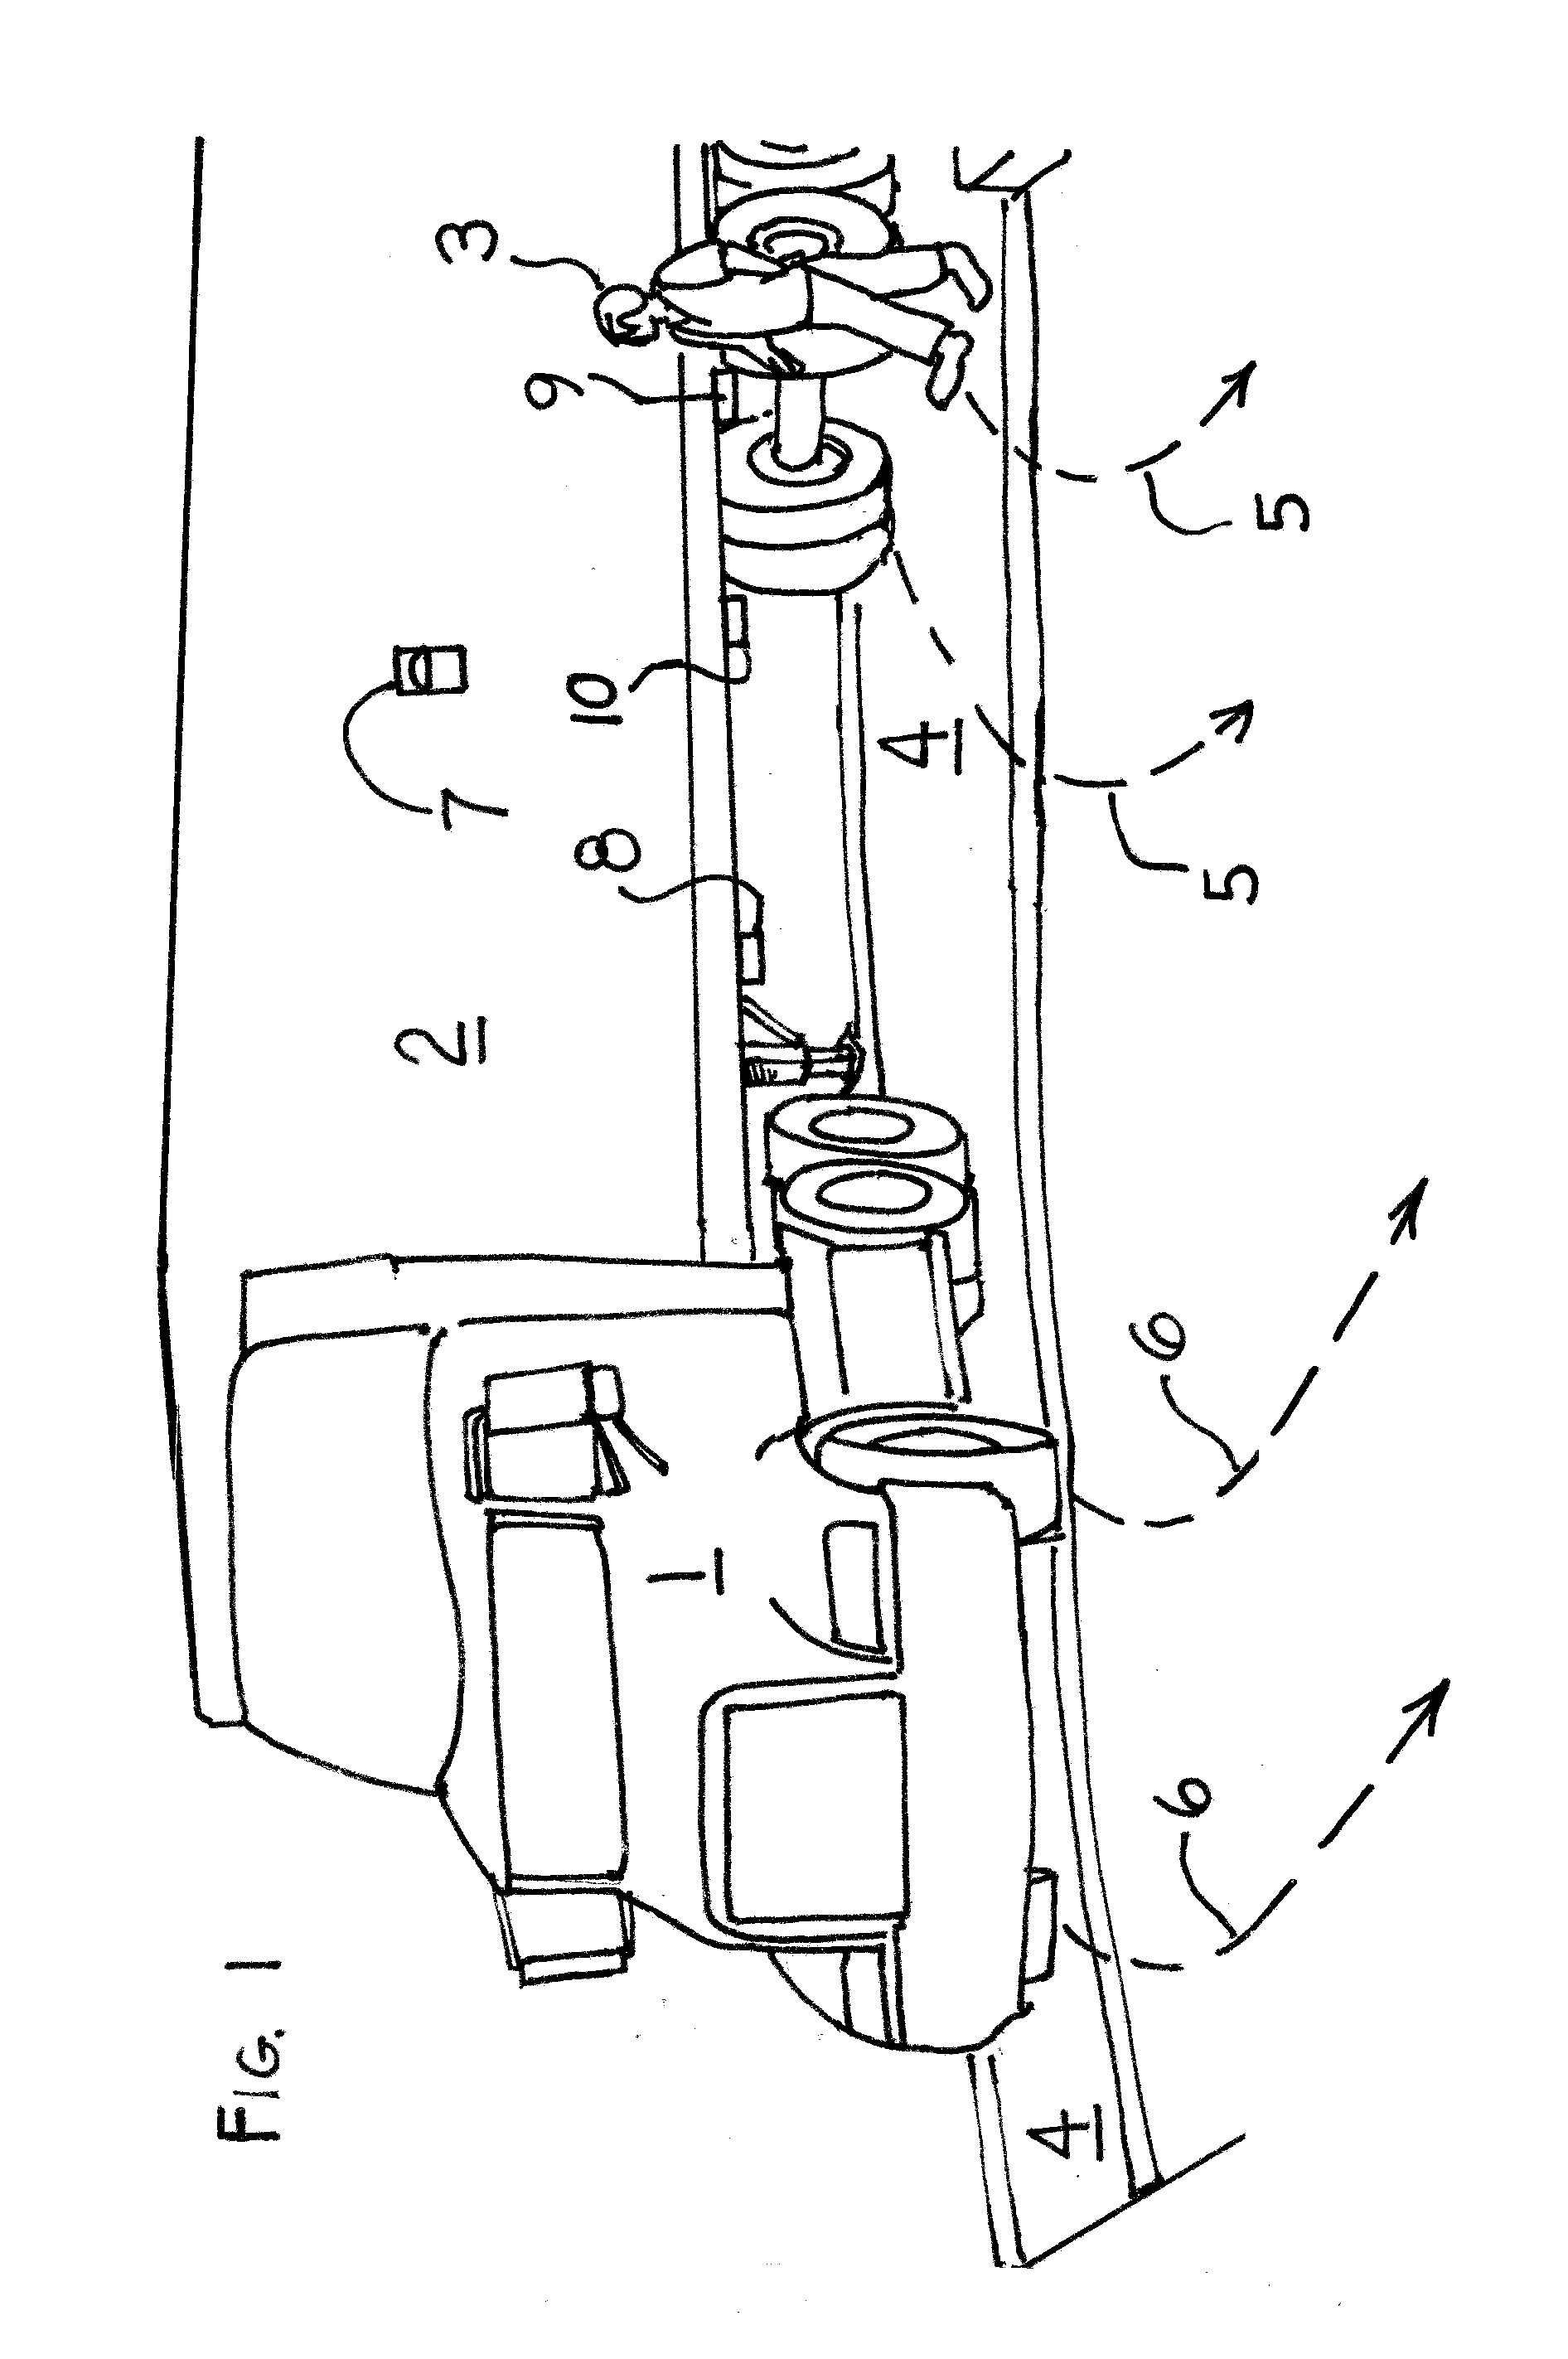 Position and pathway lighting system for a vehicle or combination of vehicles sides undersides rear or trailing wheels and rear or trailing body portion